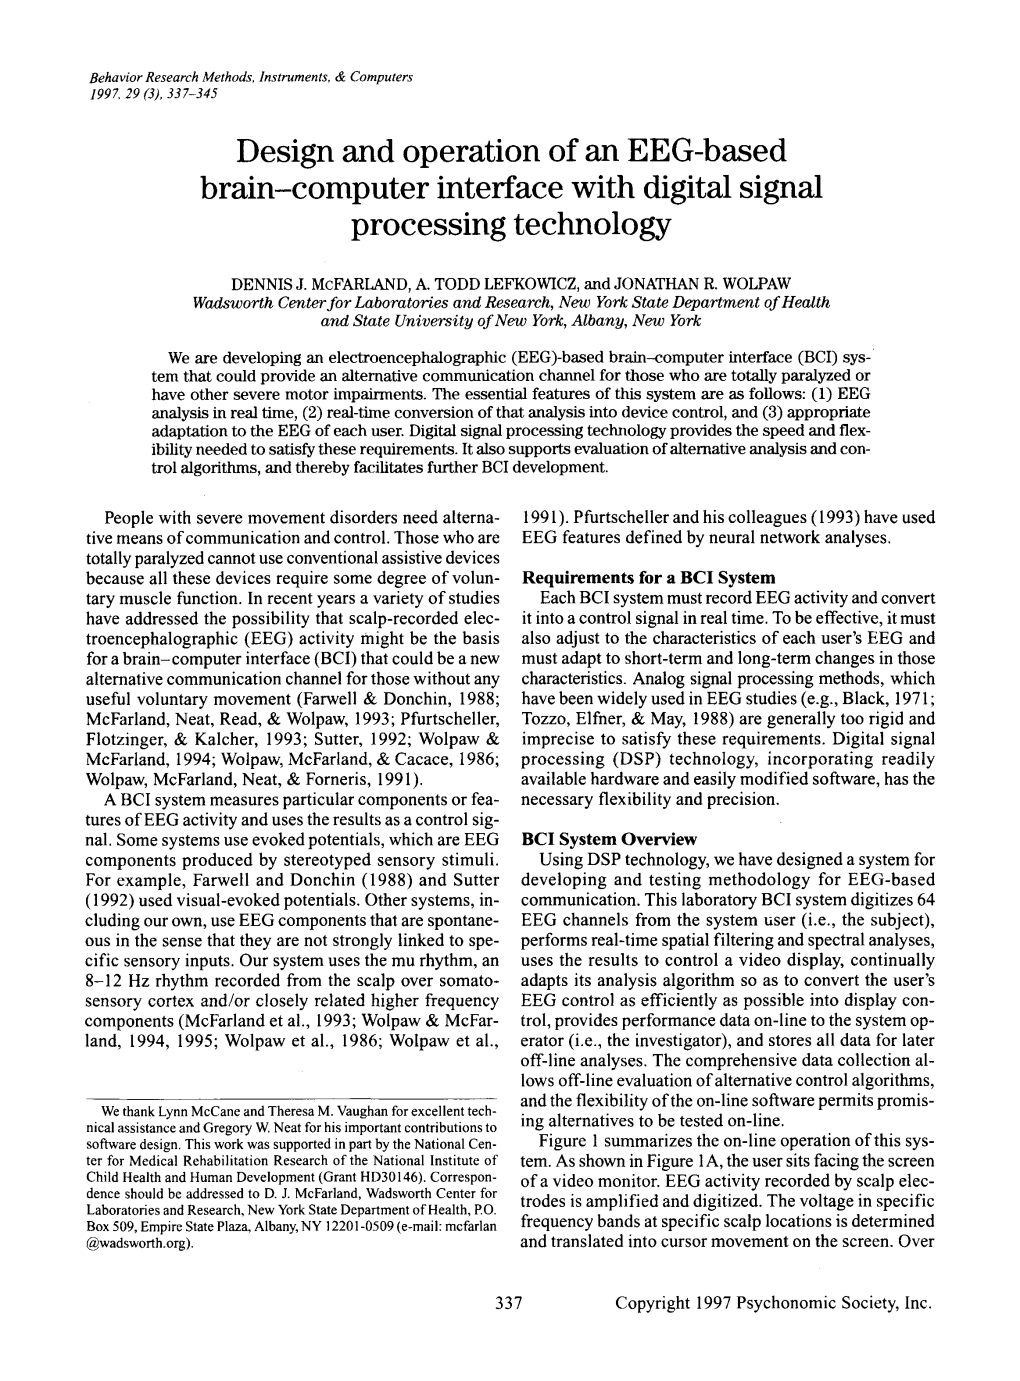 Design and Operation of an EEG-Based Brain-Computer Interface with Digital Signal Processing Technology